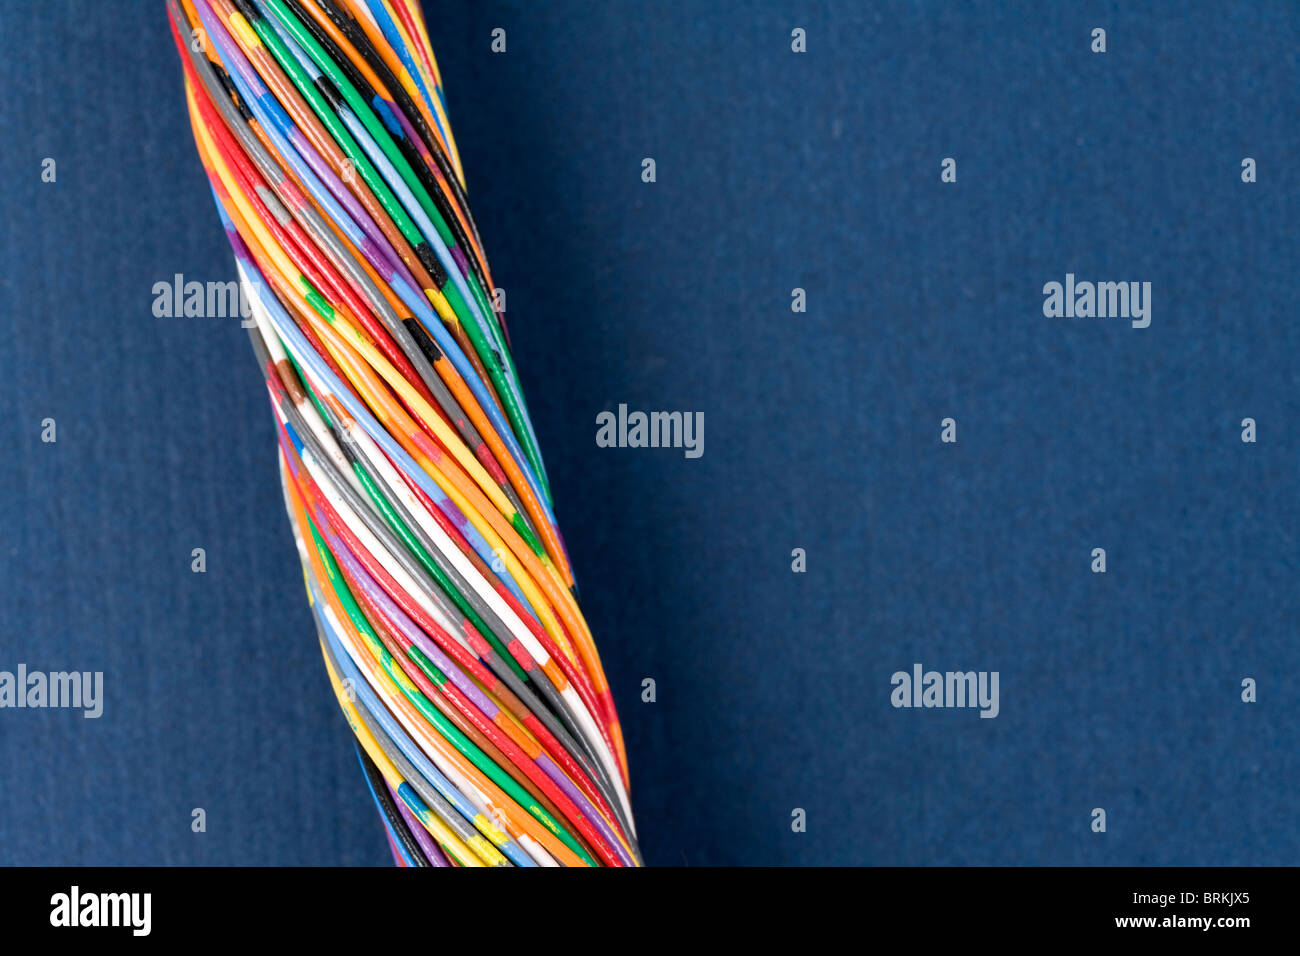 Colorful Cable, Concept of Communication, Data Line Stock Photo